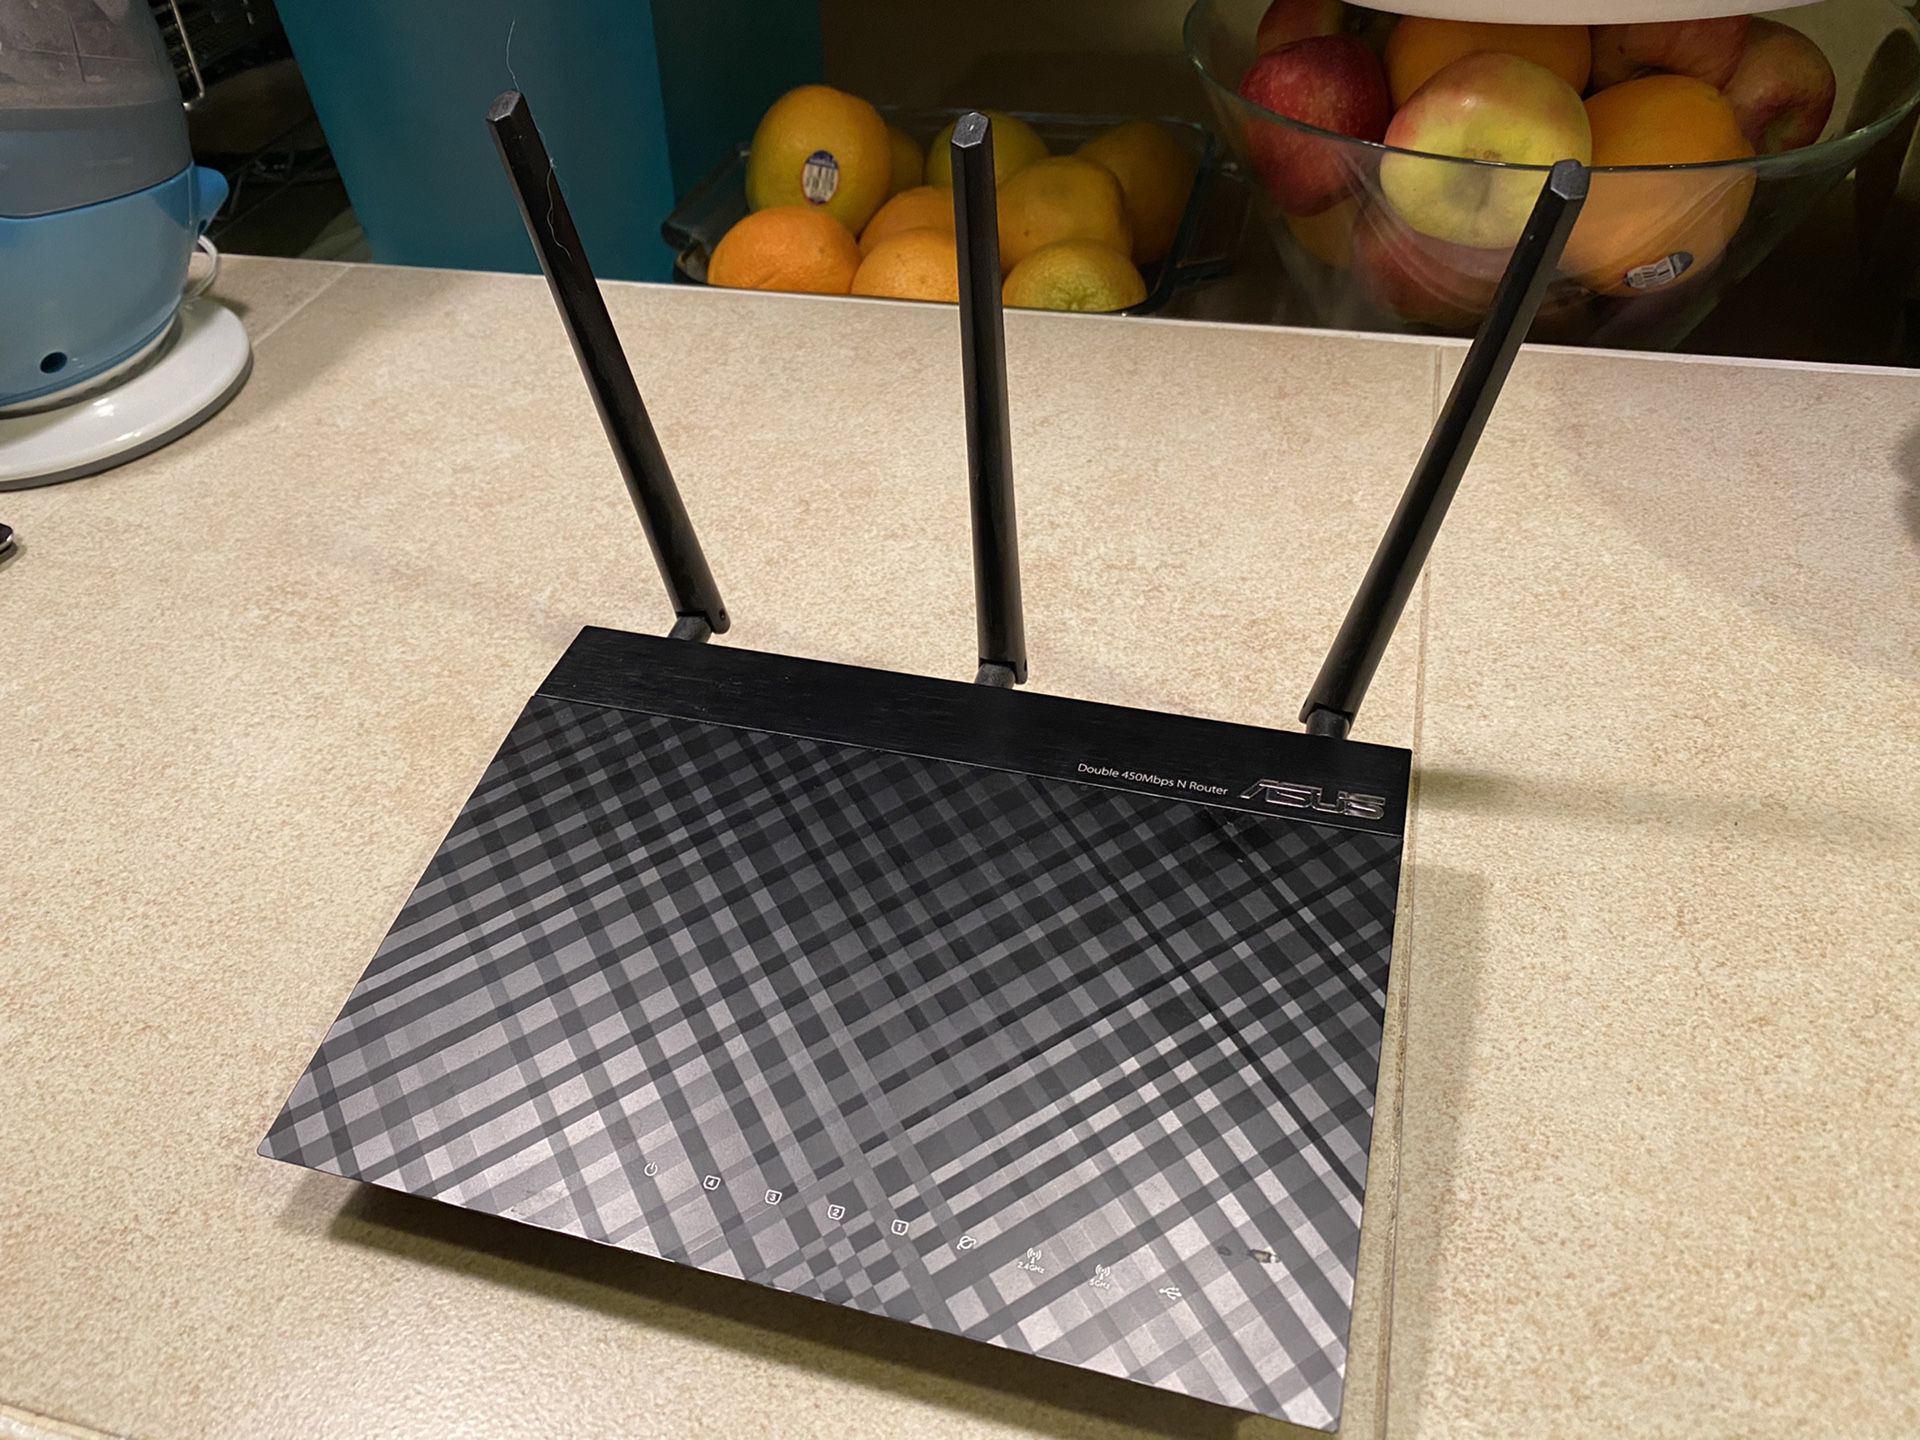 ASUS RT-N66R wireless router